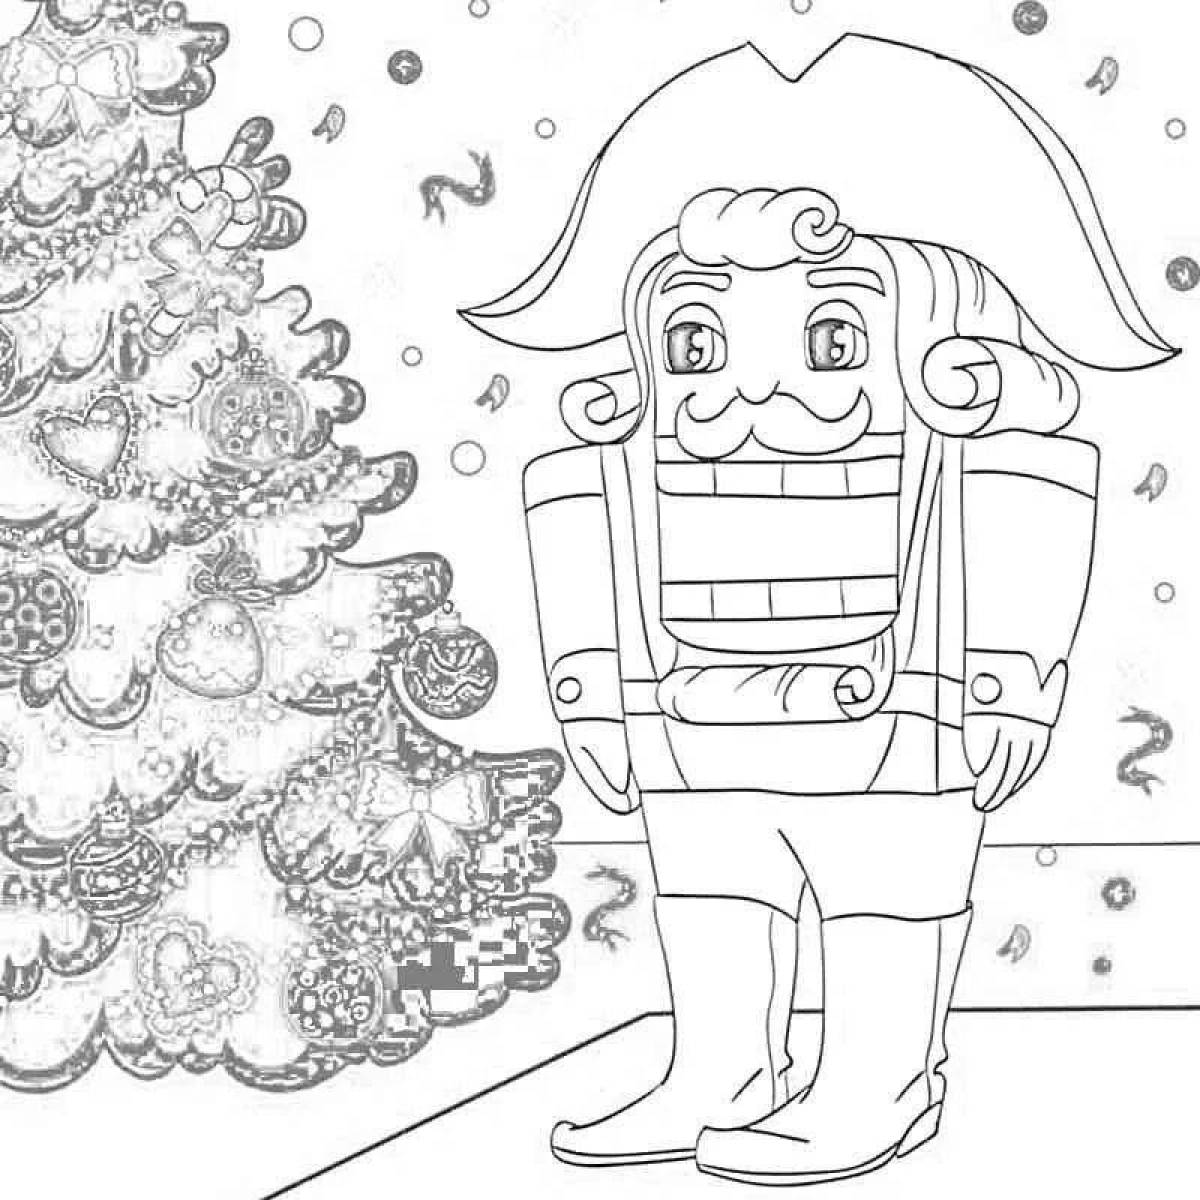 Colorful nutcracker and mouse king coloring book